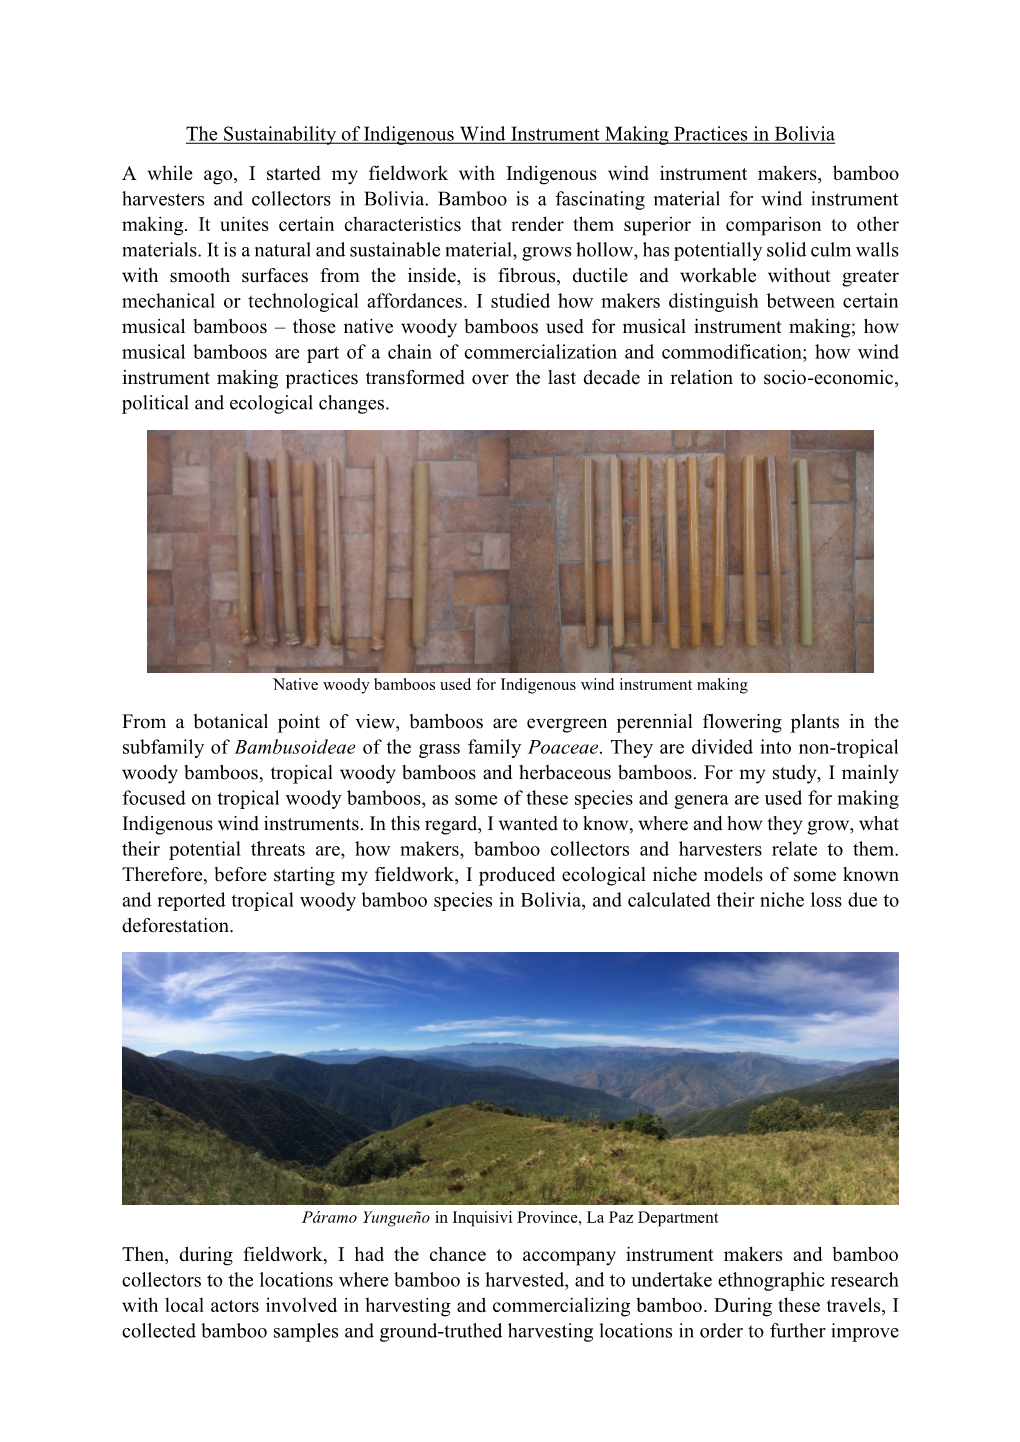 The Sustainability of Indigenous Wind Instrument Making Practices In